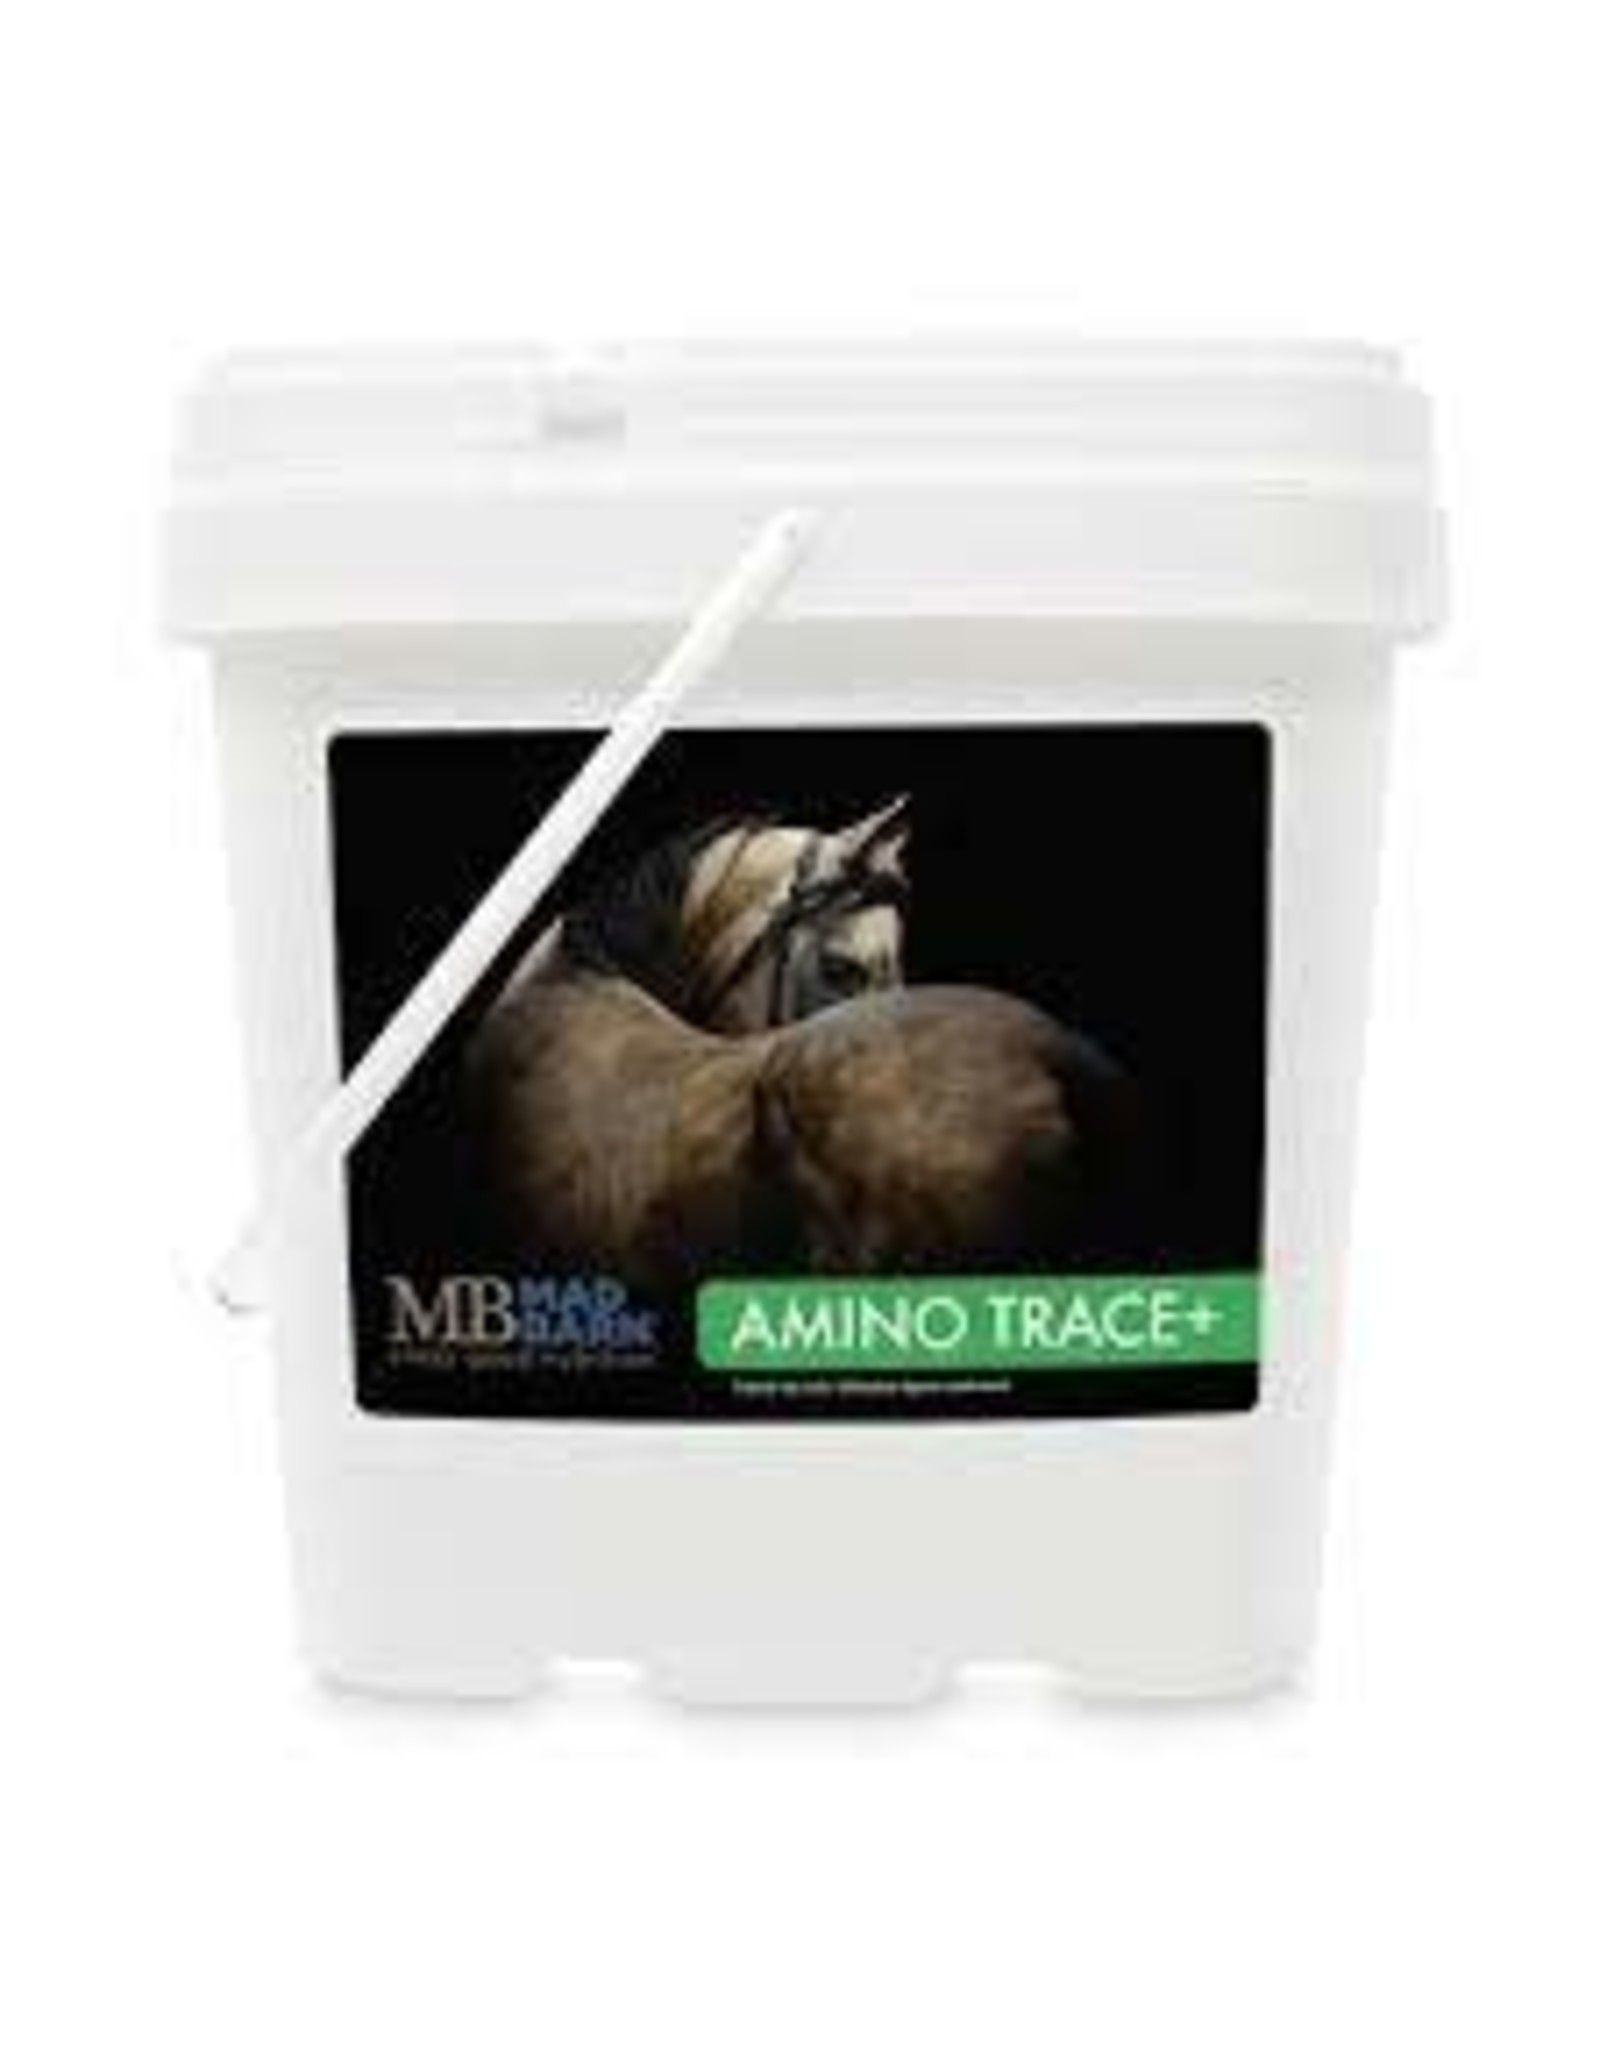 Mad Barn Canada Mad Barn Amino Trace 5kg - 628055180852 - AminoTrace+ is designed to provide the ultimate nutrition for improved hoof quality, absorption of nutrients and improved digestion – all in a convenient pelleted format.